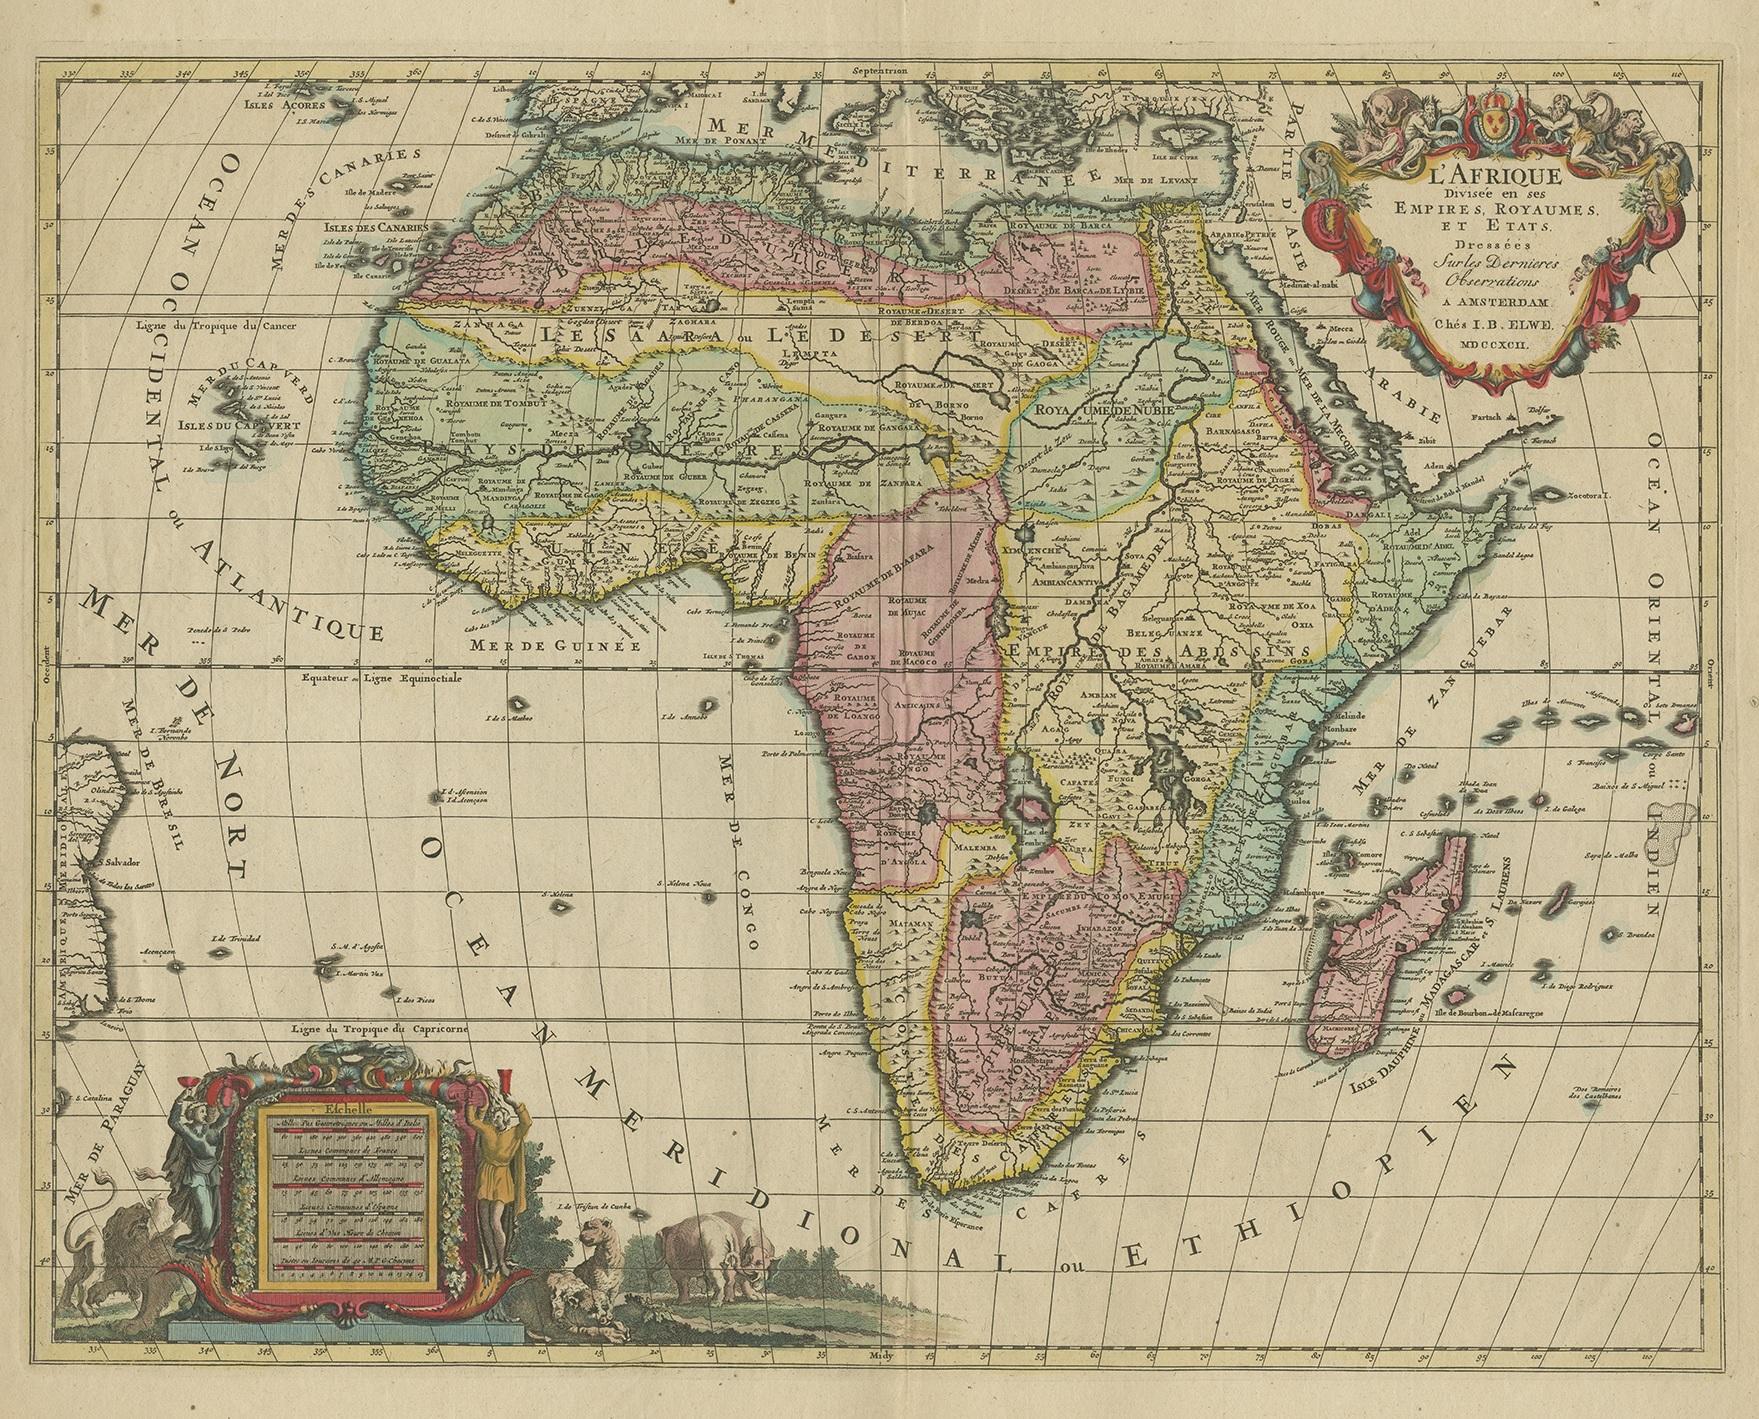 Antique map titled 'l'Afrique Divisée en ses Empires, Royaumes, et Etats'. Decorative large map of Africa. The cartography is typical for the 17th century with the Nile originating in two large lakes below the equator. The River Zaire (Congo) also